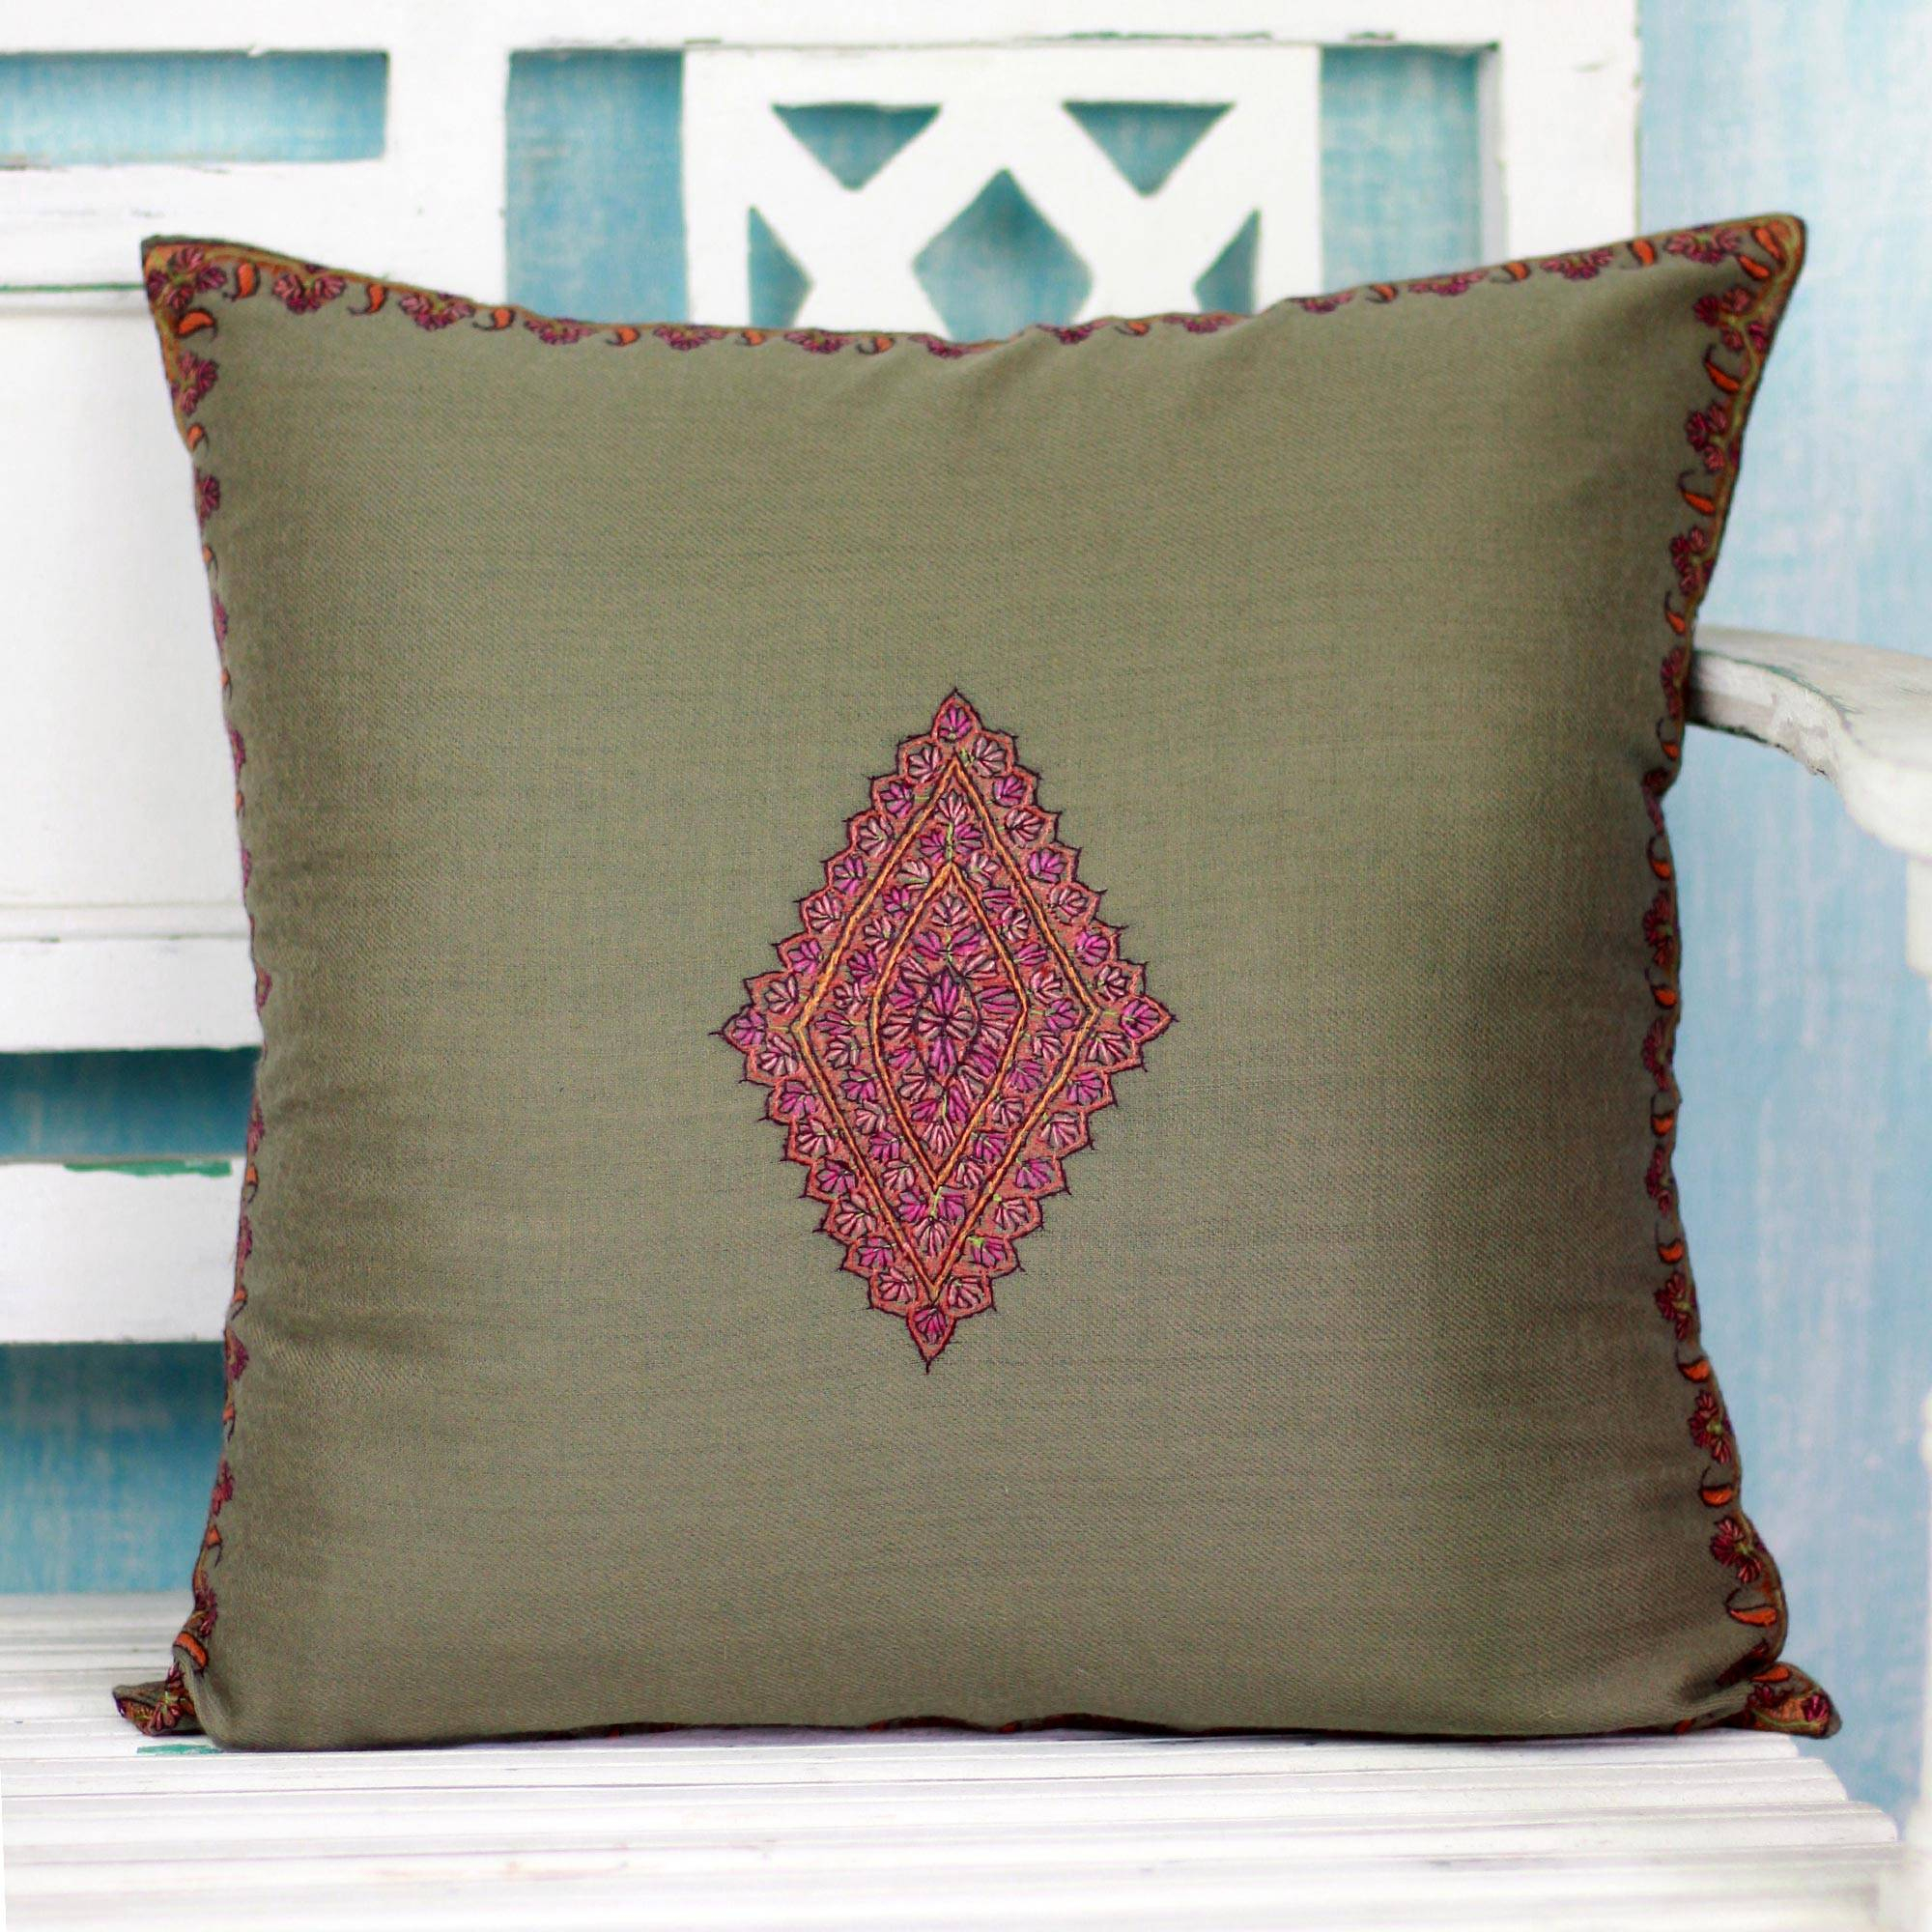 Cushion Cover Embroidery Patterns Cushion Cover Handcrafted In India Embroidered With Diamond Forest Delight